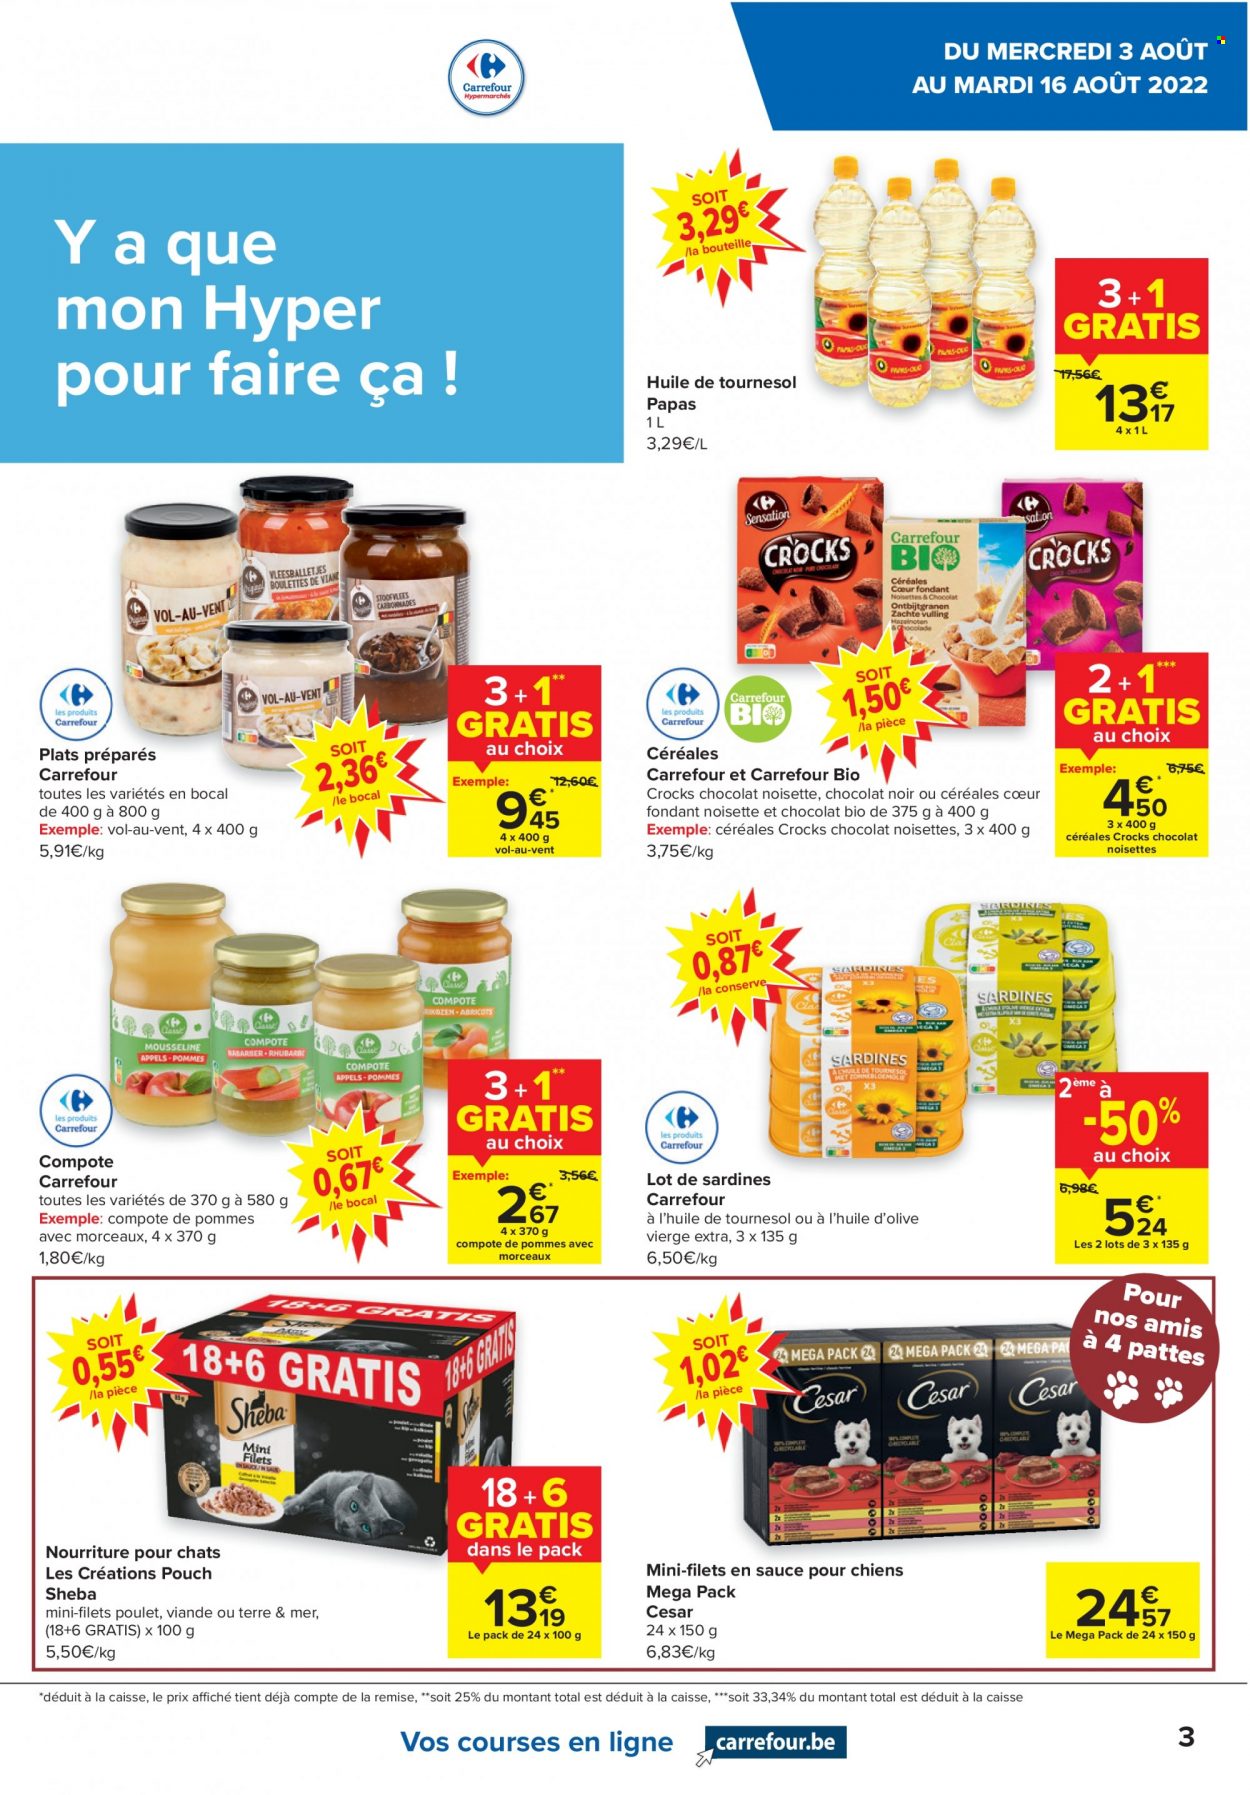 Catalogue Carrefour hypermarkt - 3.8.2022 - 16.8.2022. Page 3.